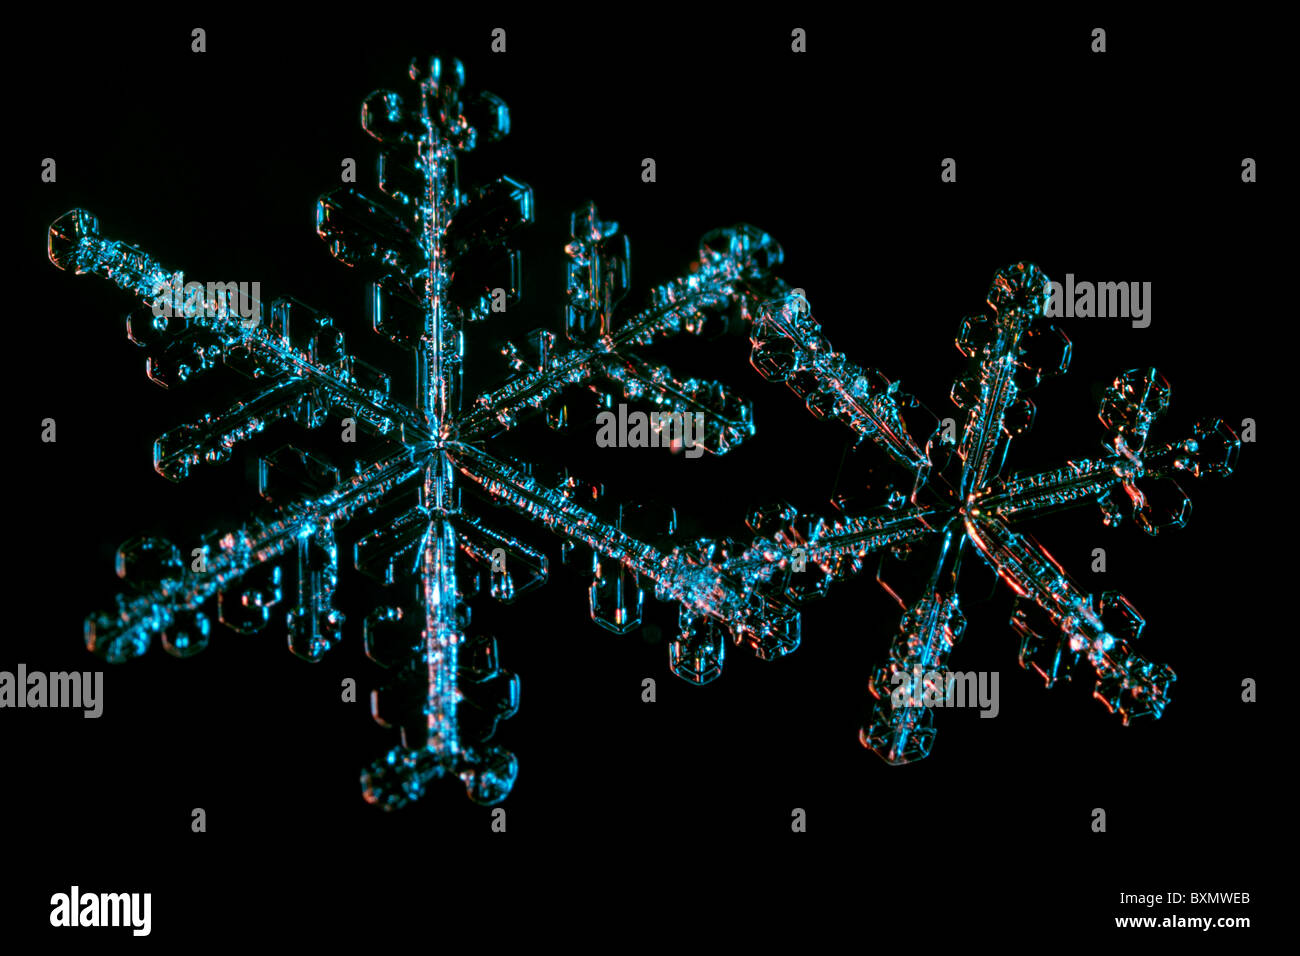 Extreme close-up photo of two real snowflakes, shot with coloured flashes on a black background. Stock Photo